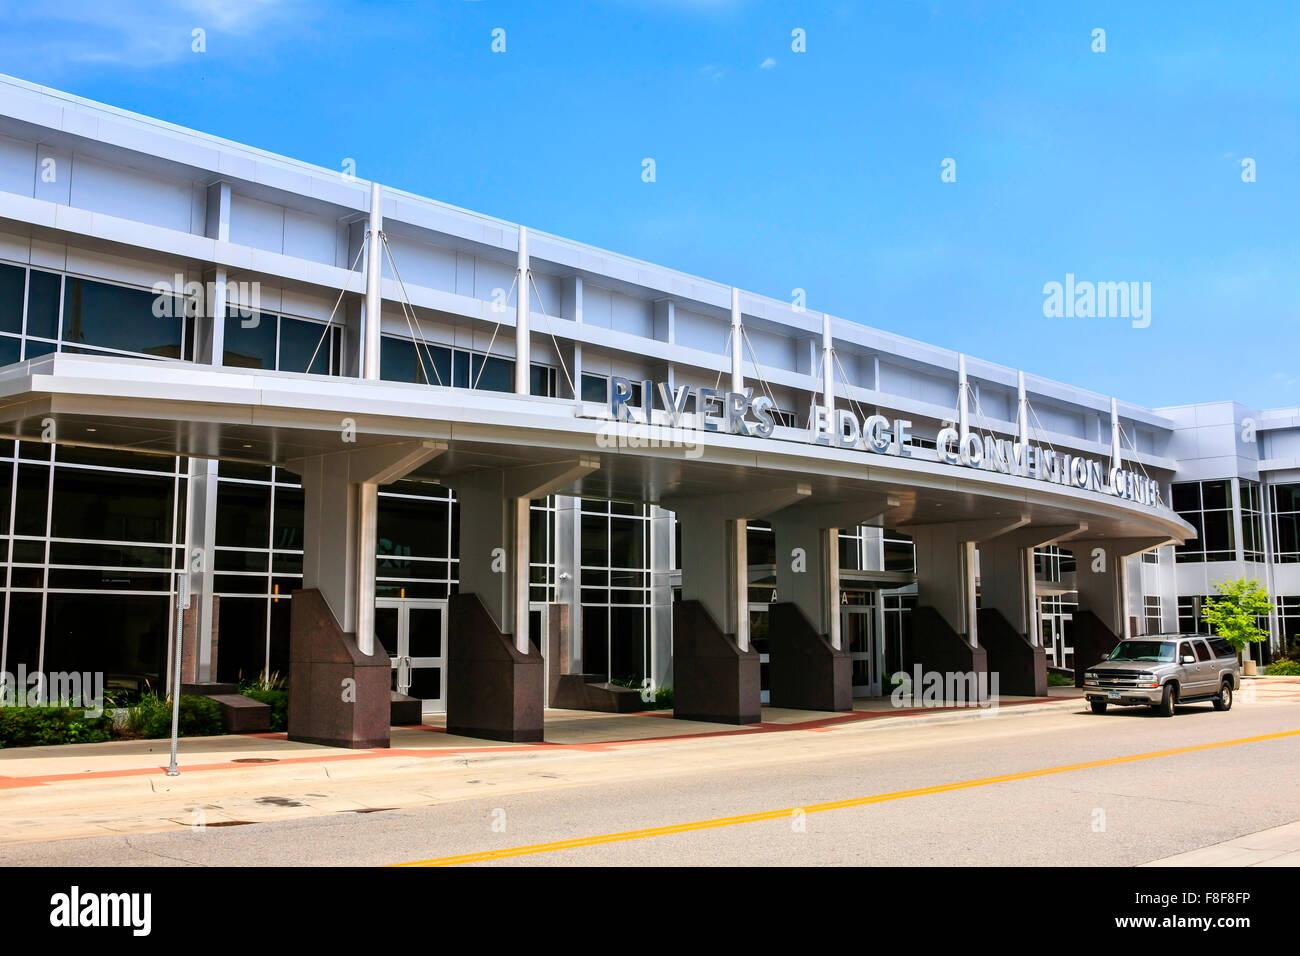 The Rivers Edge Convention Center in downtown St. Cloud Minnesota Stock Photo